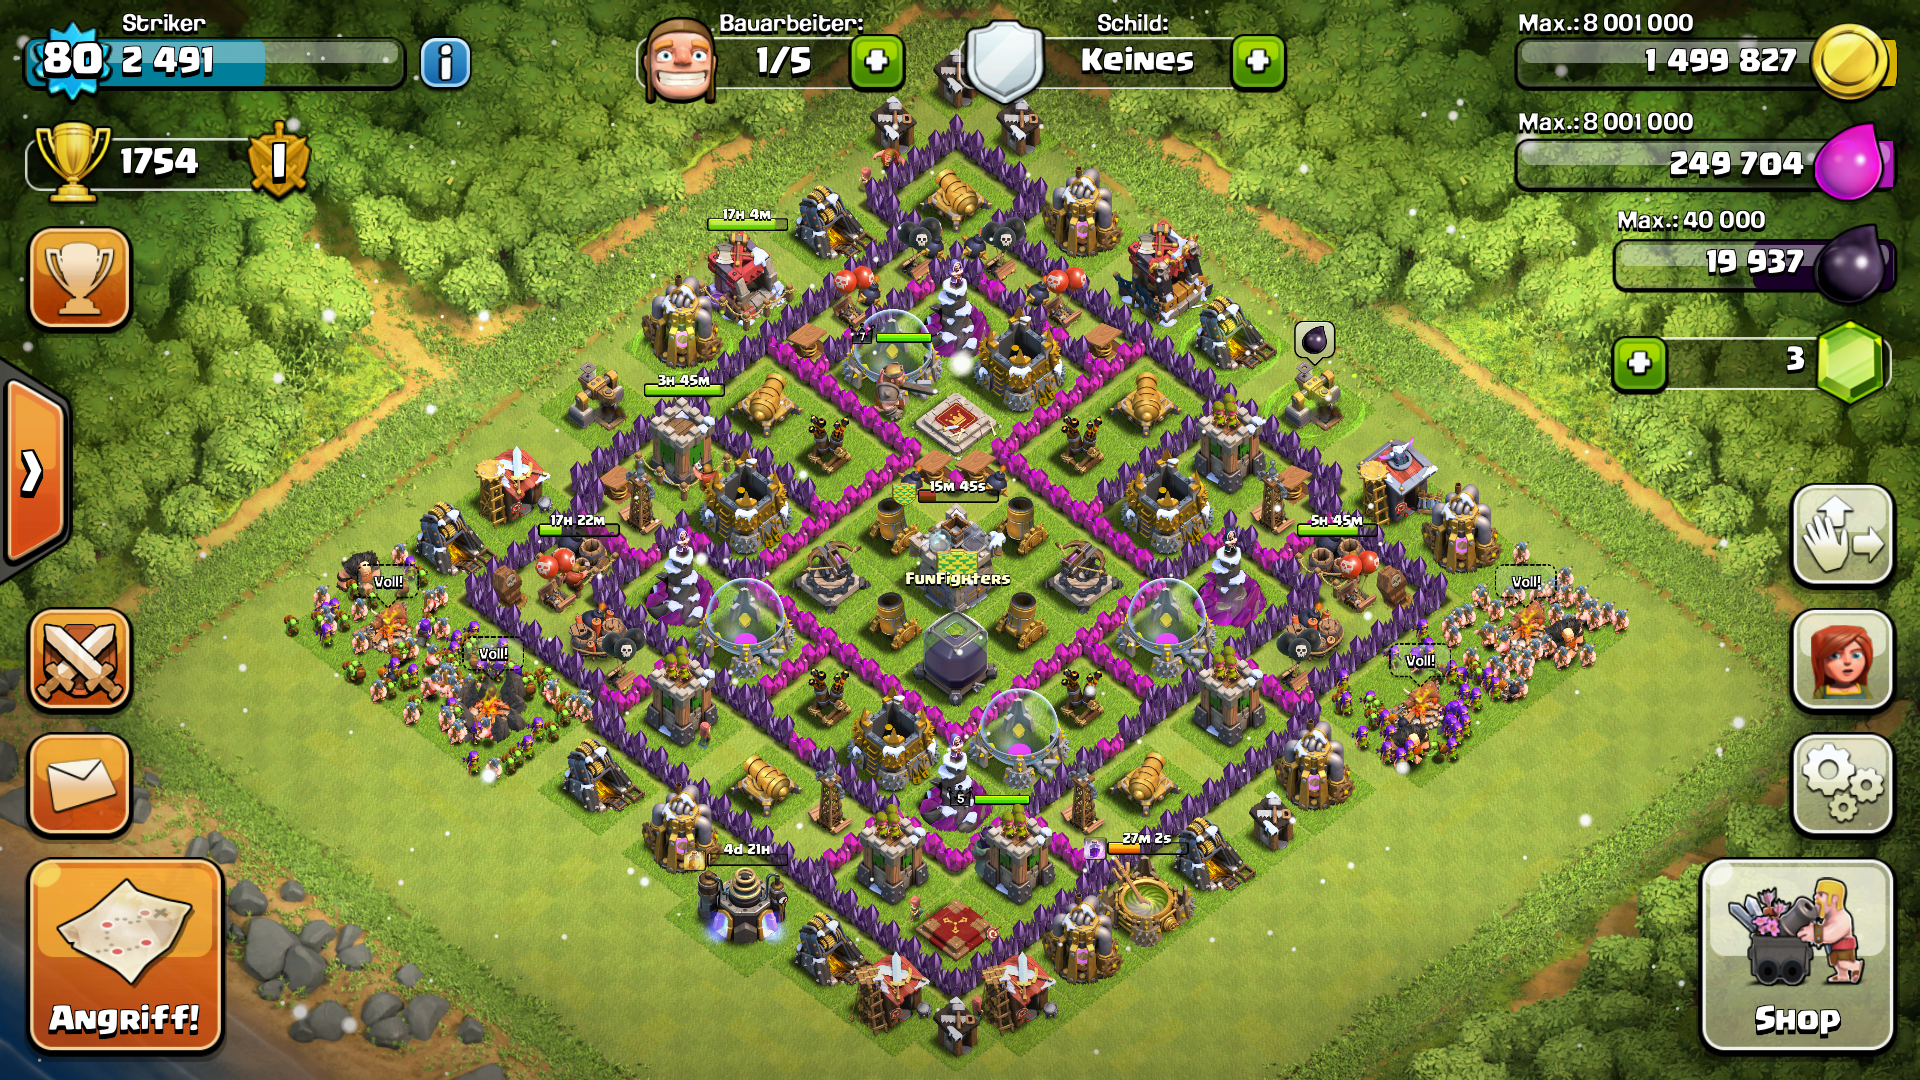 Clash Of Clans Rathaus Level 8 Farming Base / 12+ Best TH8 Farming Base ** Links ** 2020 Anti Everything